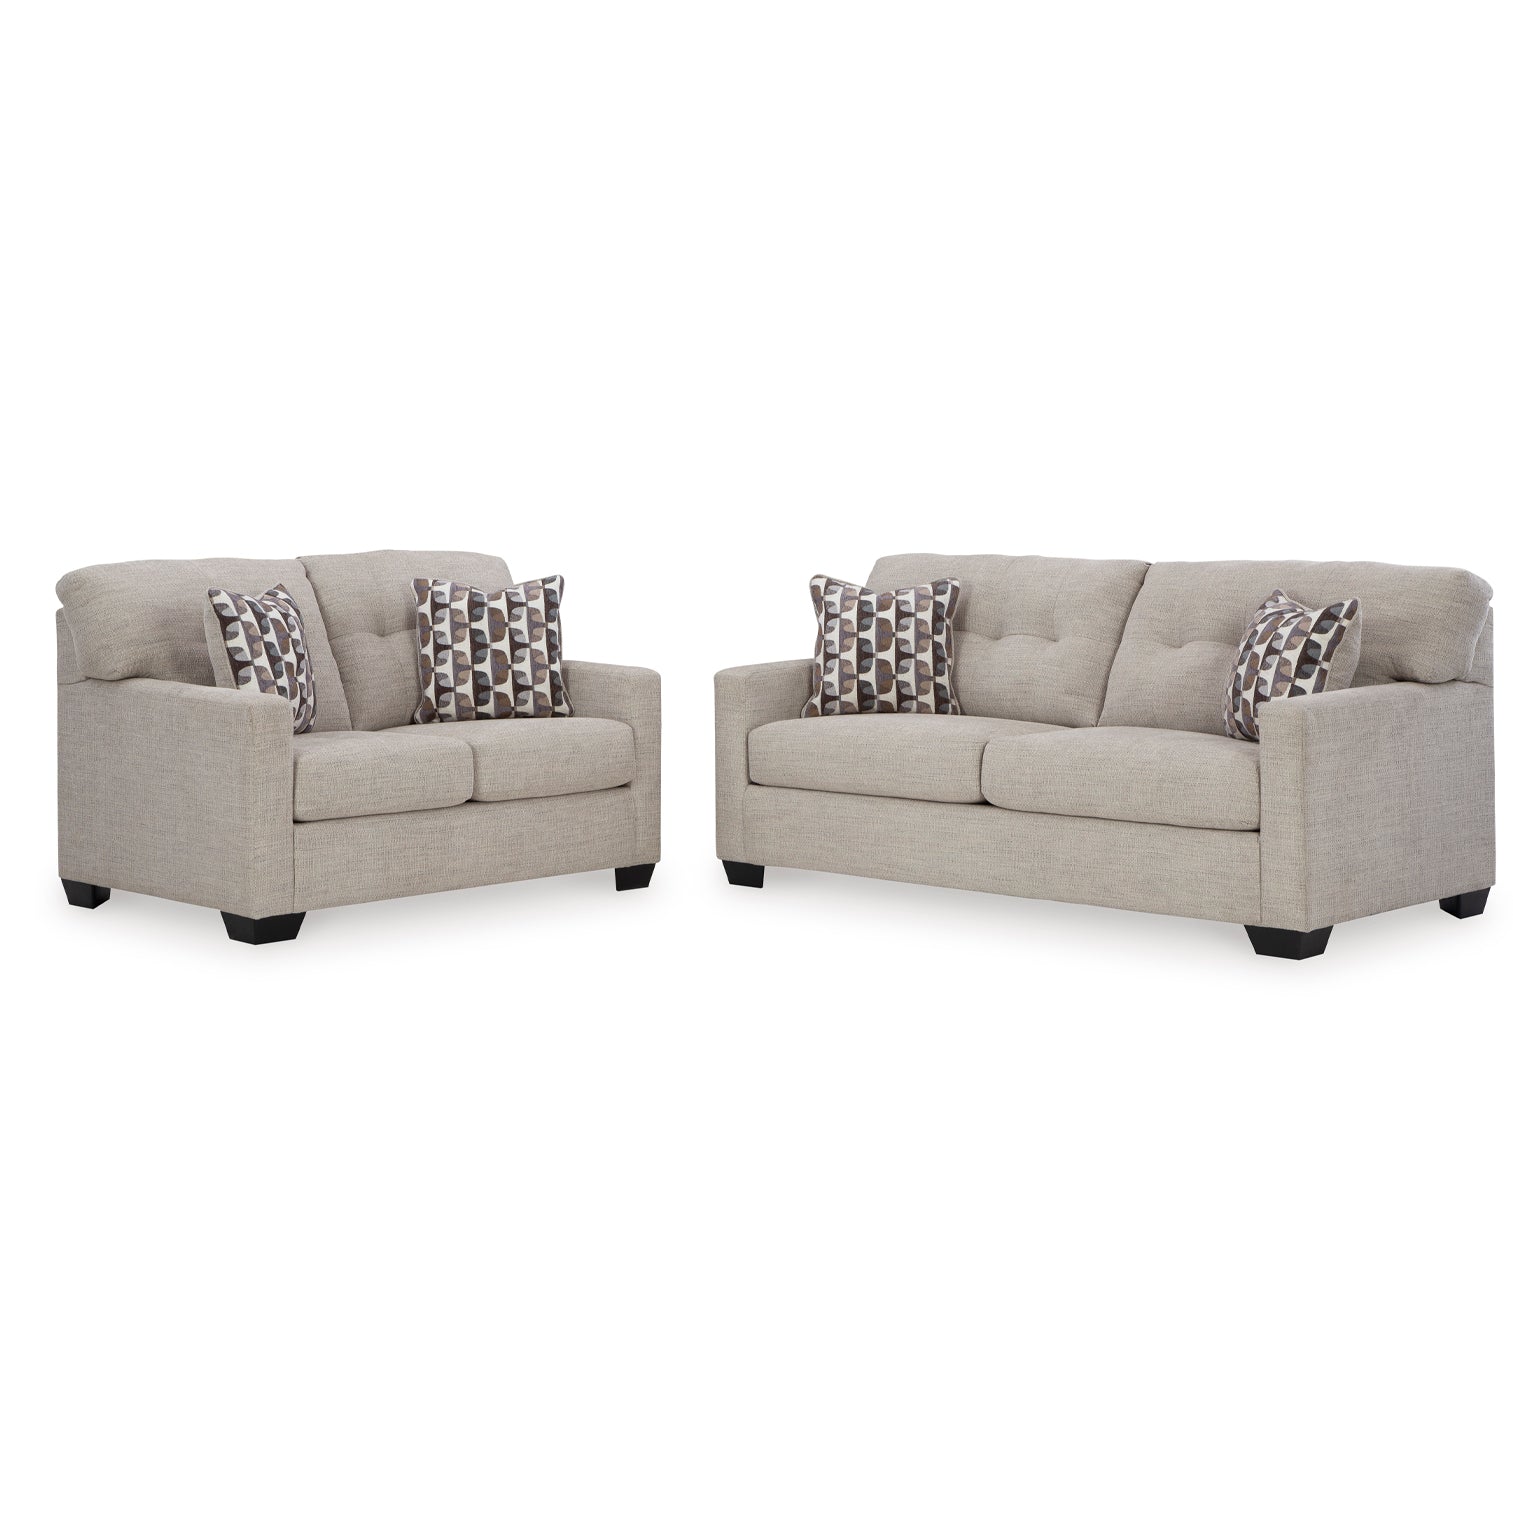 Mahoney Sofa and Loveseat set in pebble color, ideal for contemporary Milwaukee homes